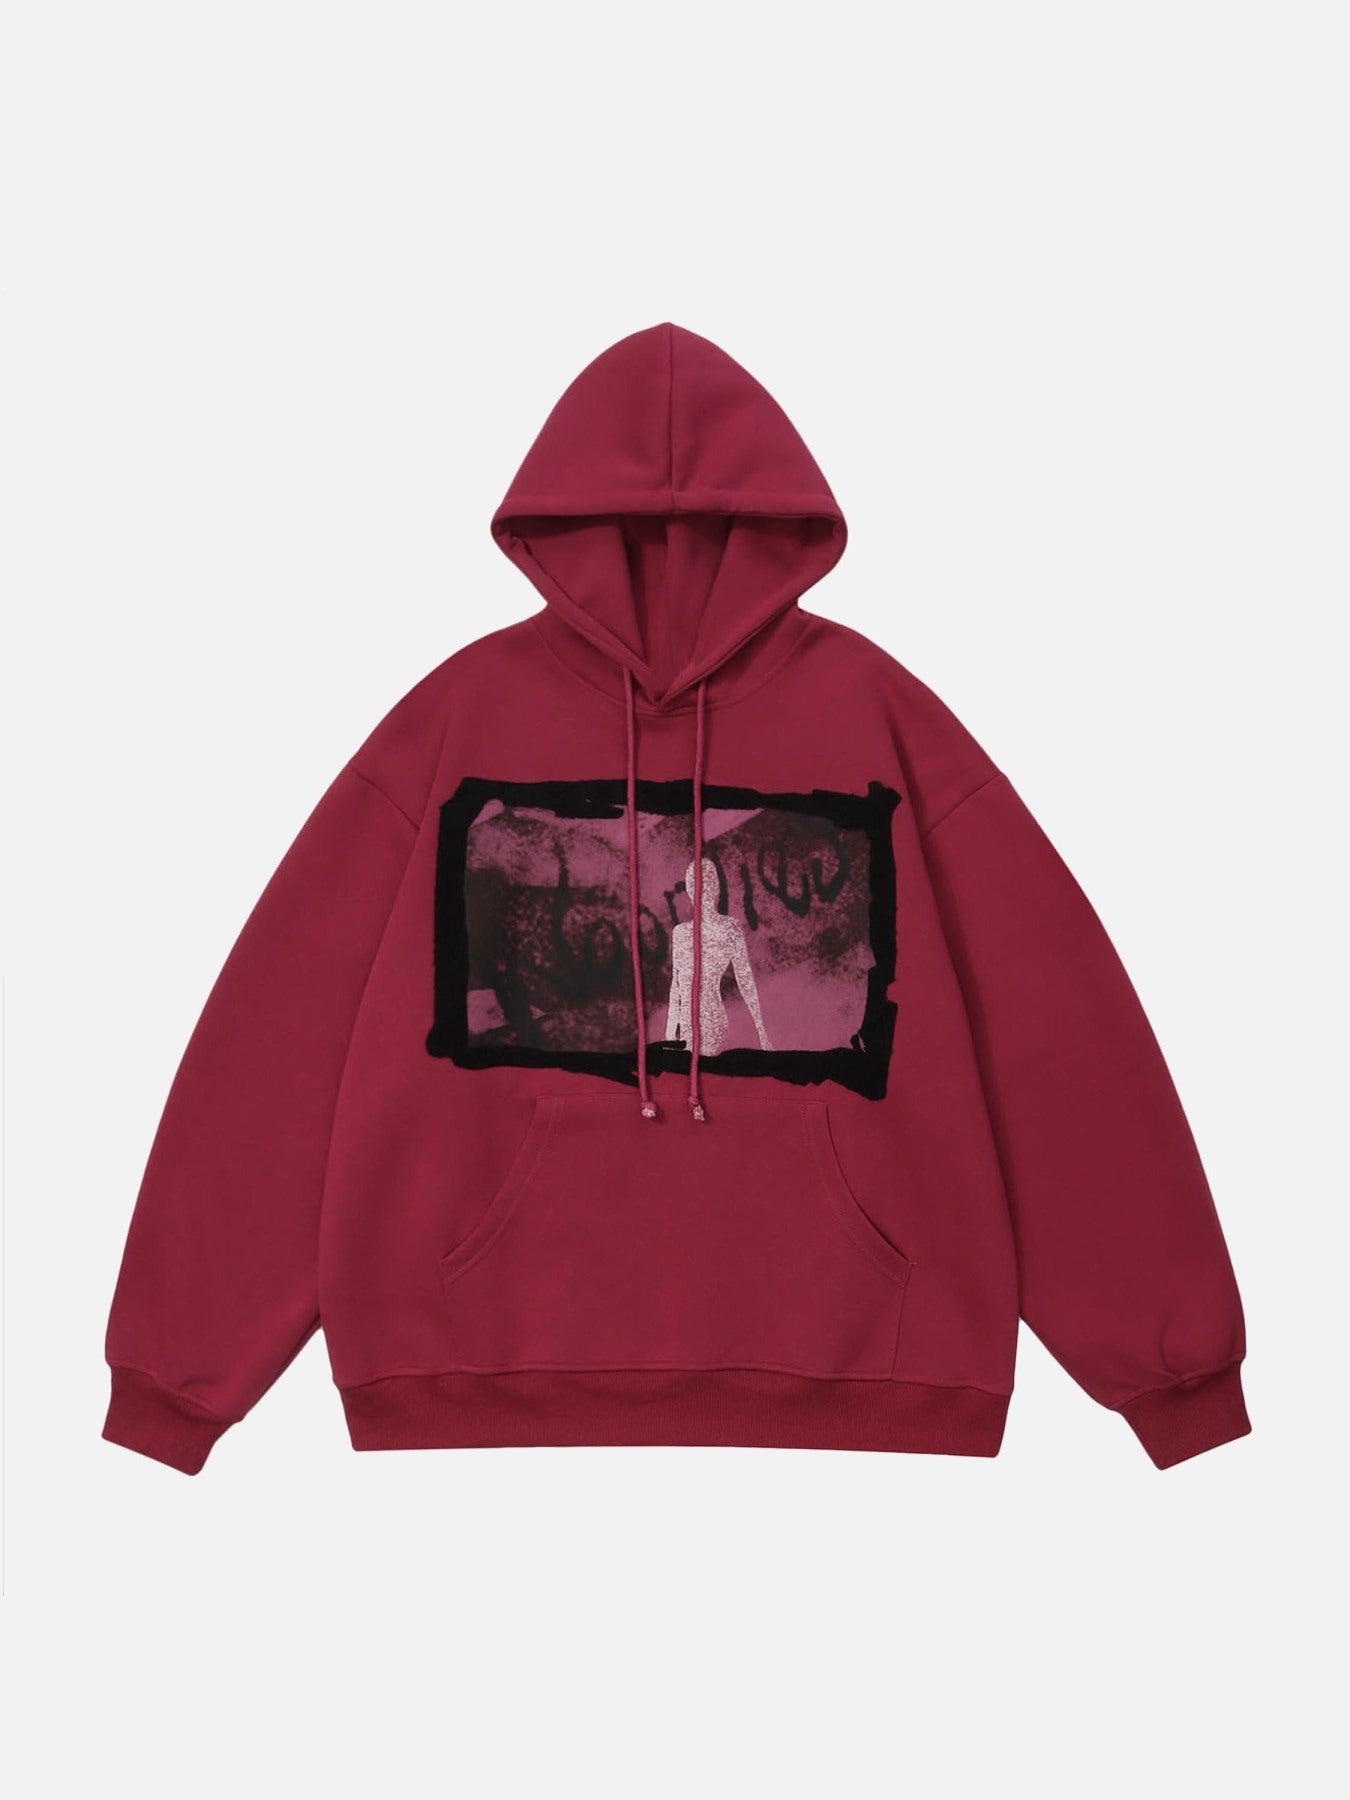 Thesupermade Draw Pattern Hoodie